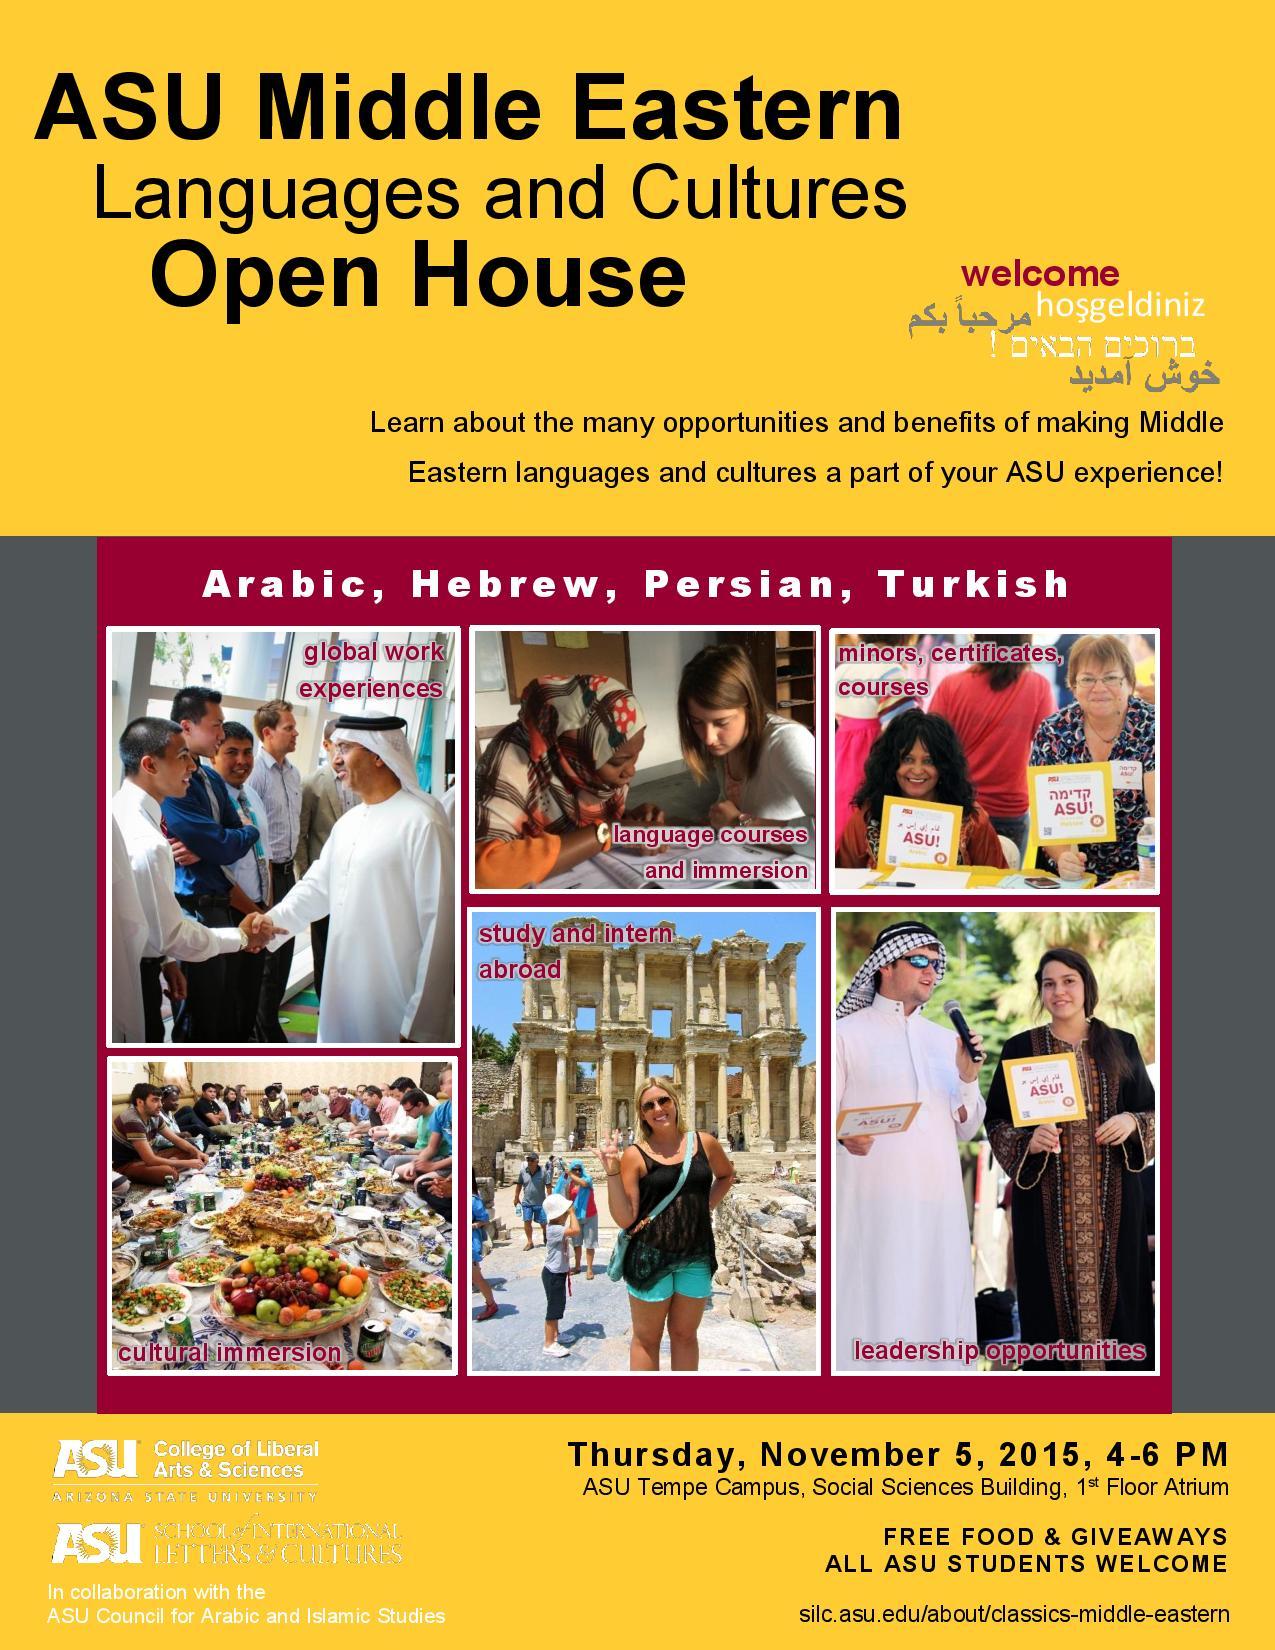 ASU Middle Eastern Languages and Cultures Open House flyer